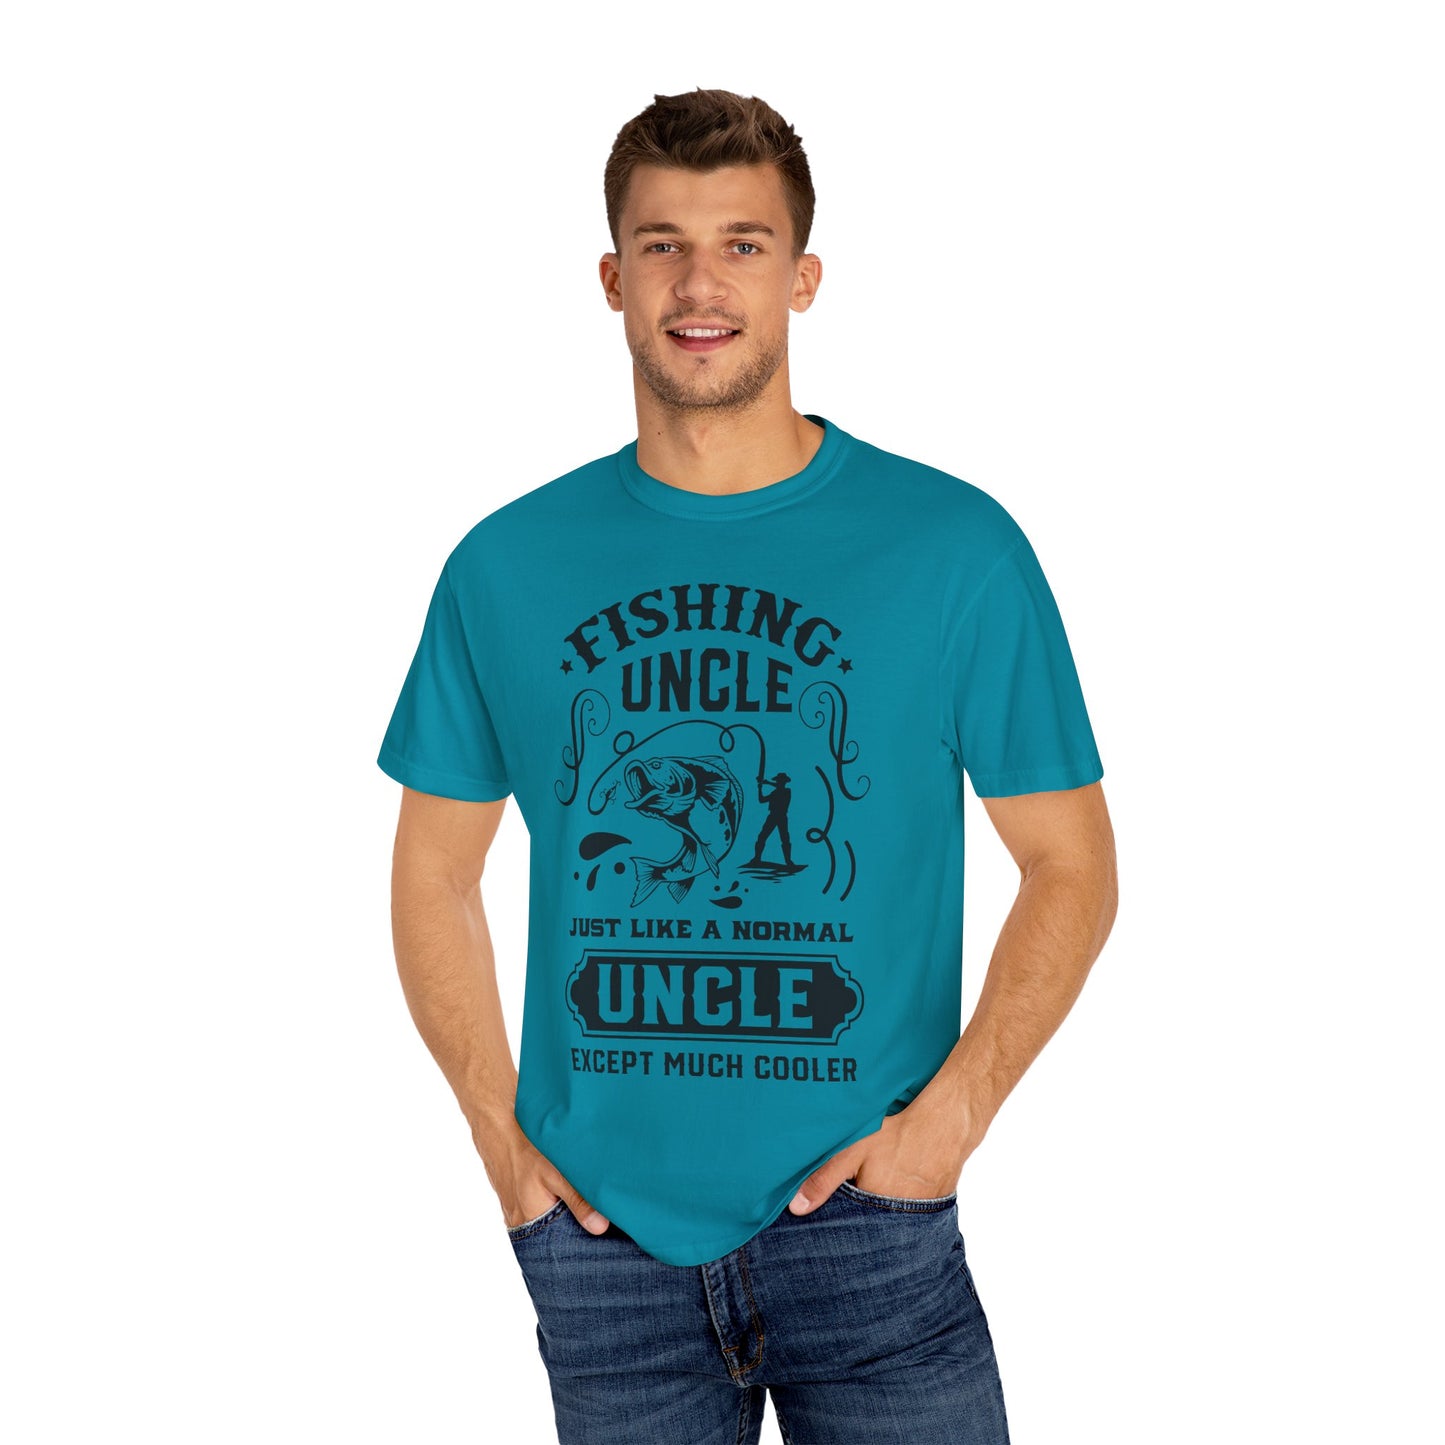 Fishing uncle is cool: Unisex Garment-Dyed T-shirt